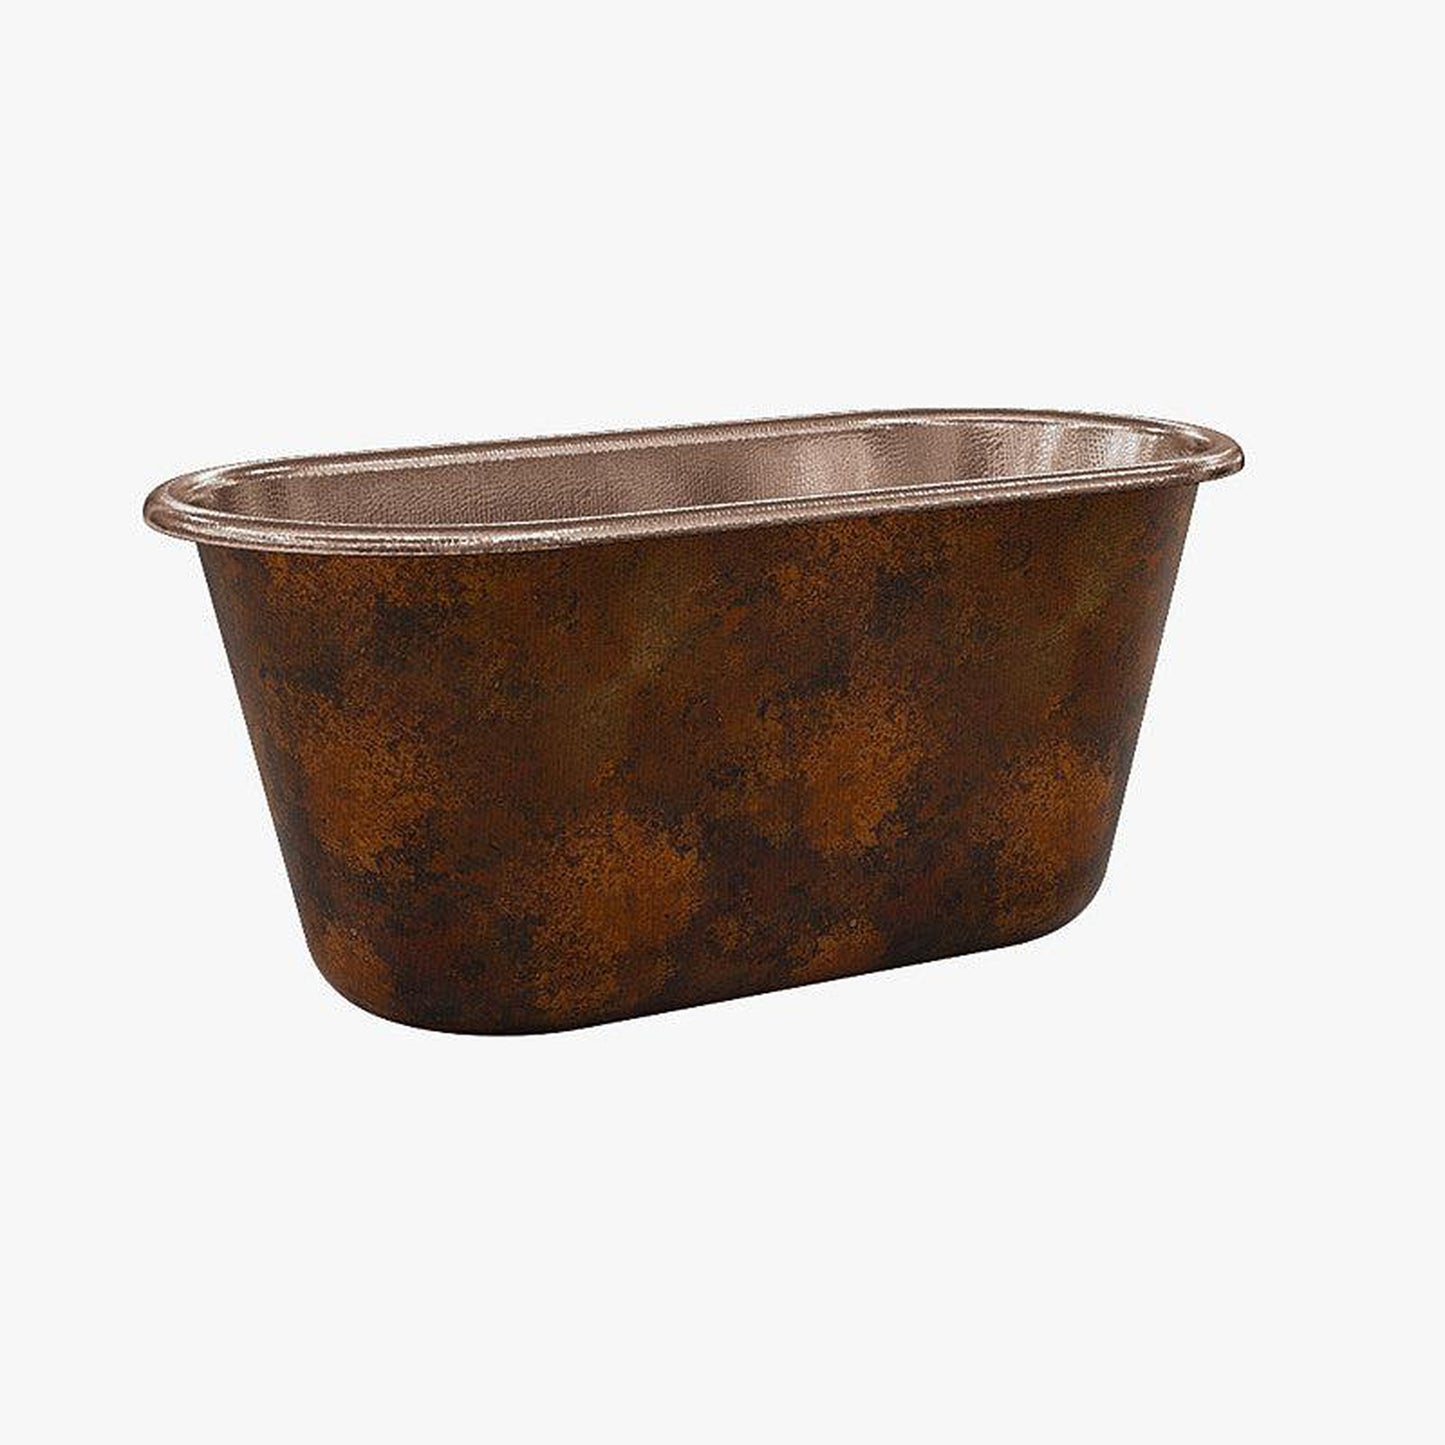 CopperSmith Heritage HX1 64" x 31" x 31" 14-Gauge Fire Copper Freestanding Bathtub With Polished Copper Interior and Polished Chrome Push Button Tub Drain and Polished Brass Tub Filler